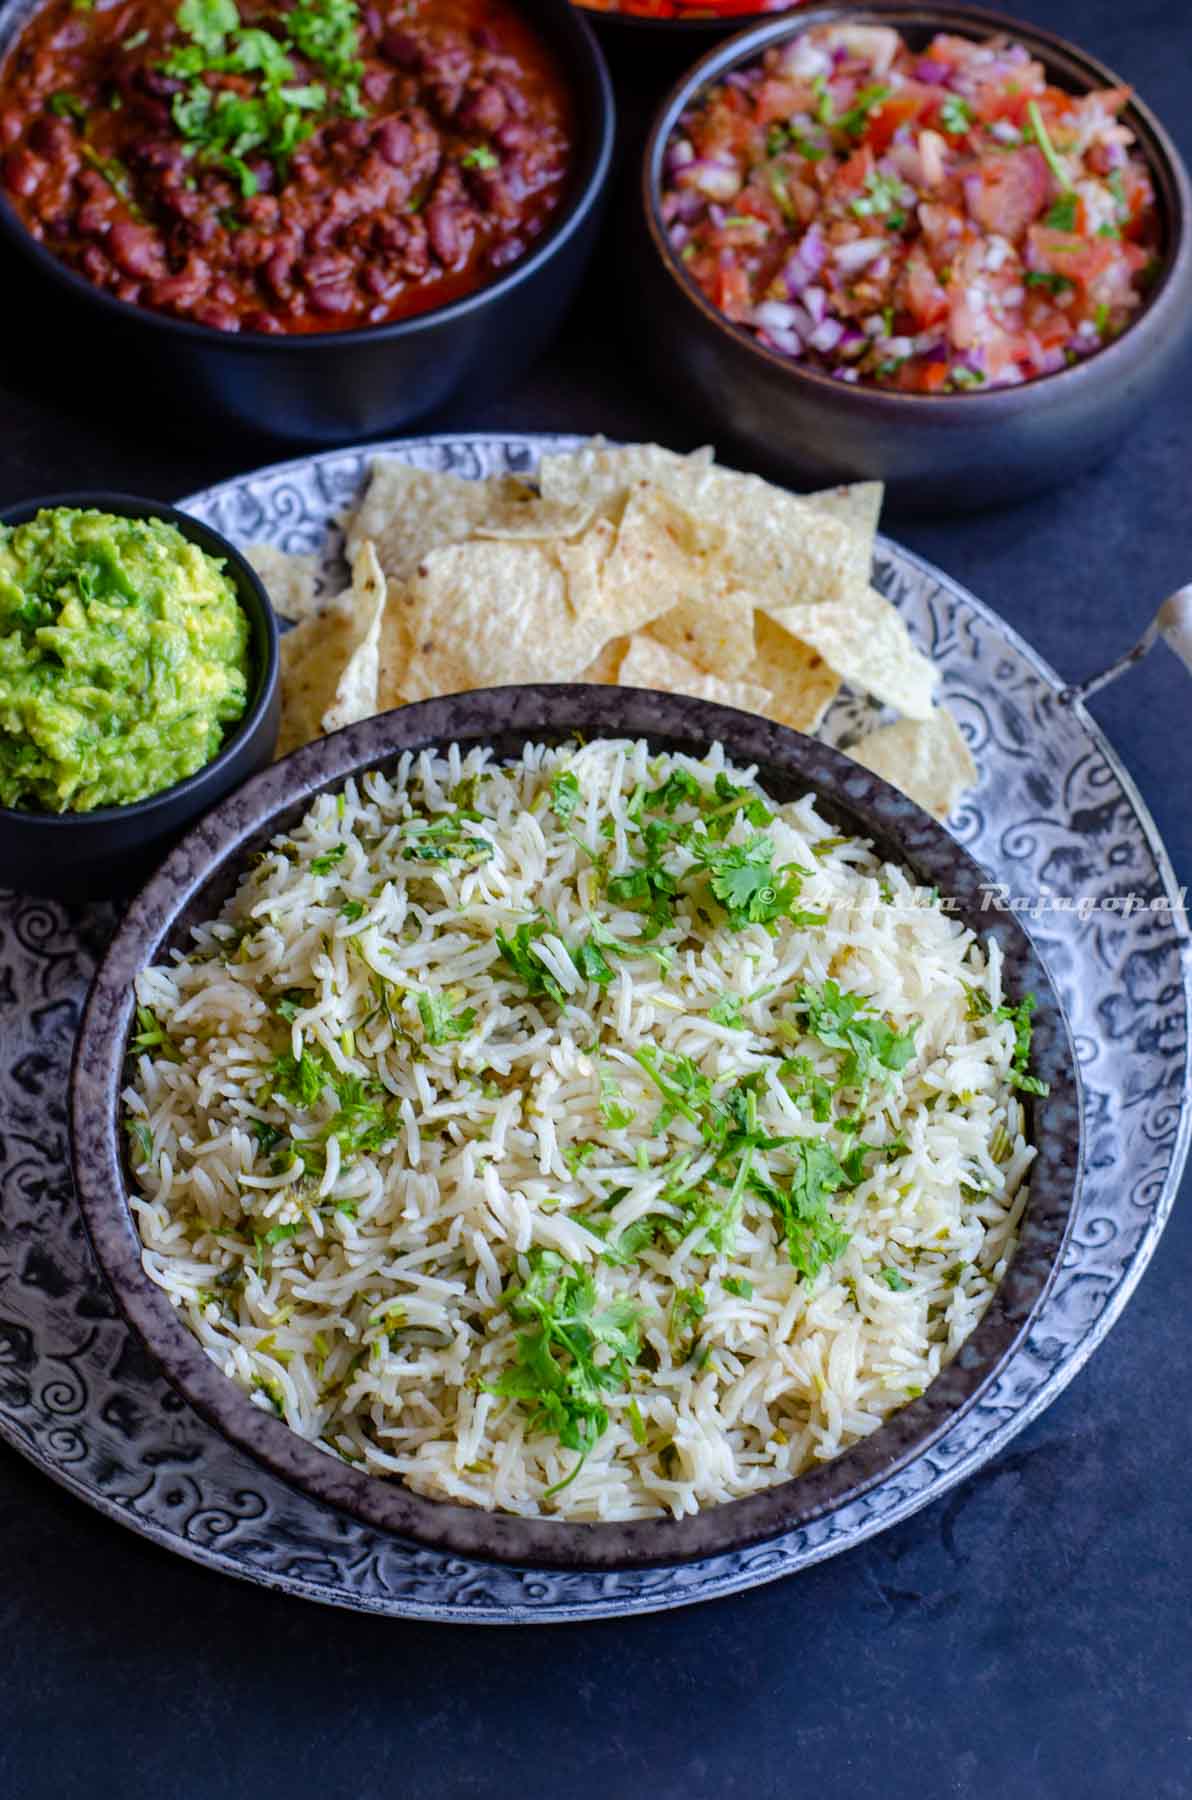 Mexican style cilantro lime rice served in a black dish with guacamole, tortilla chips and other condiments at the background.